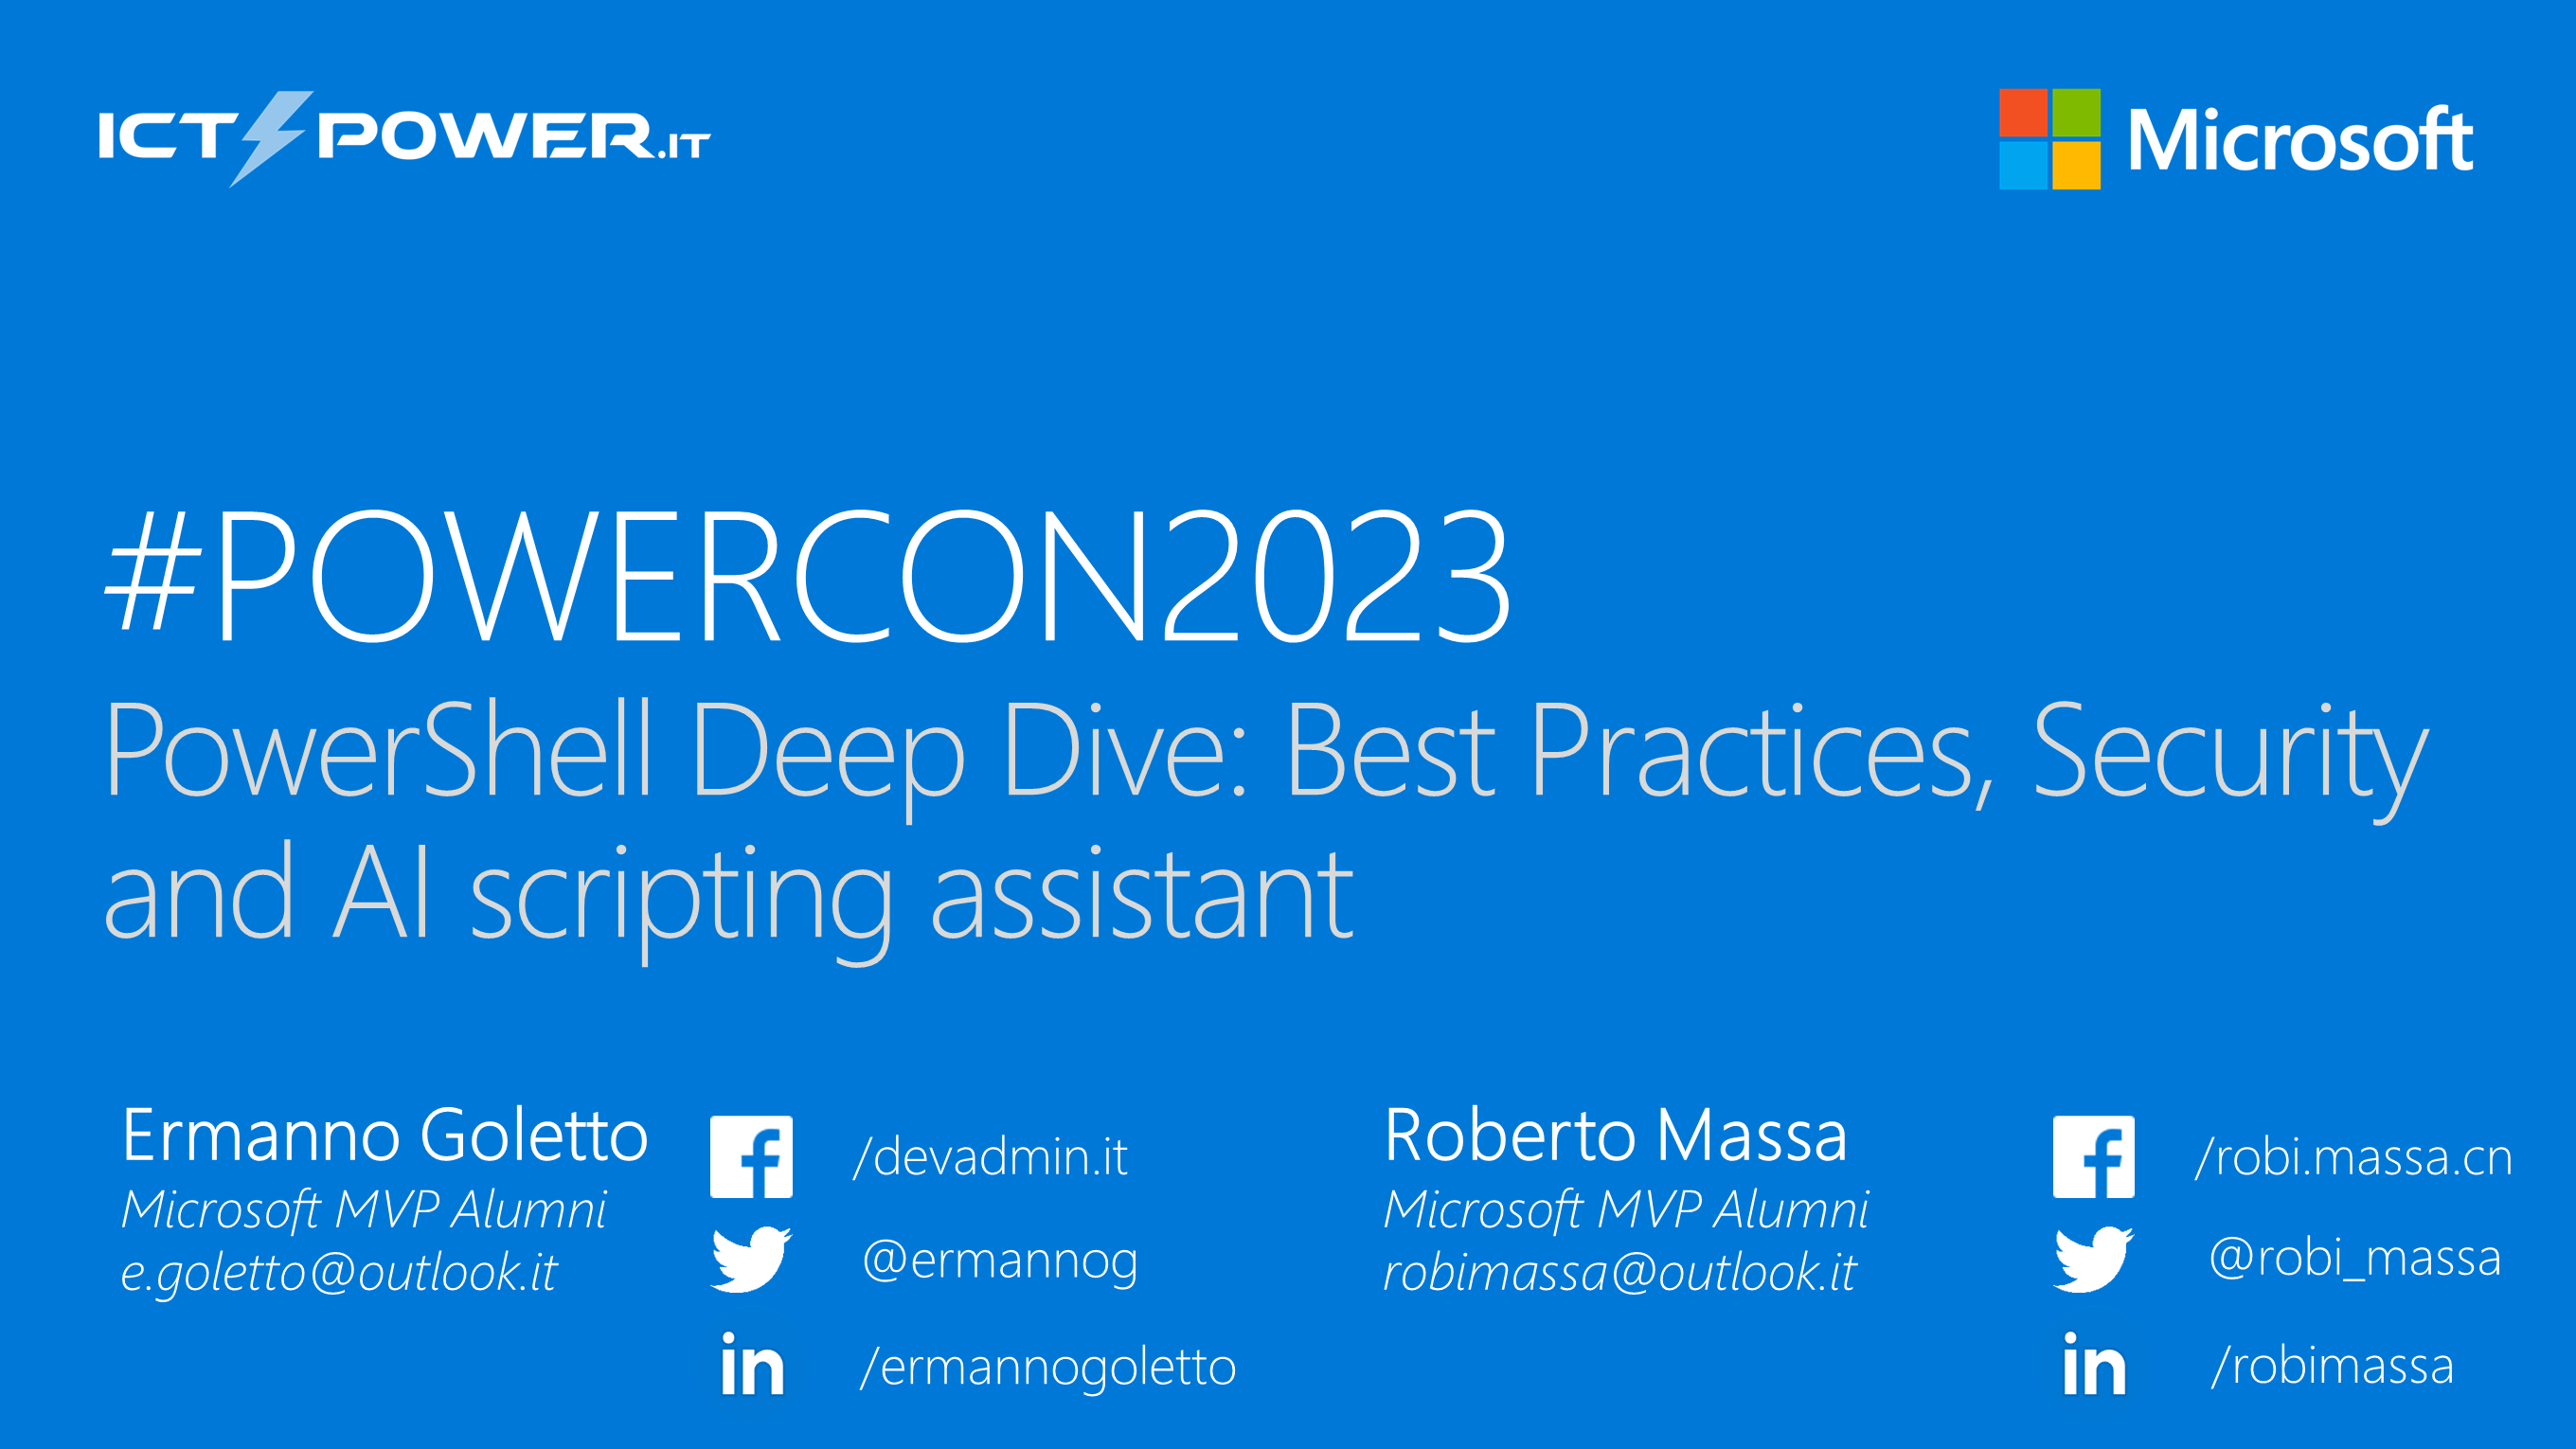 Ermanno Goletto e Roberto Massa – PowerShell Deep Dive: Best Practices, Security and AI scripting assistant